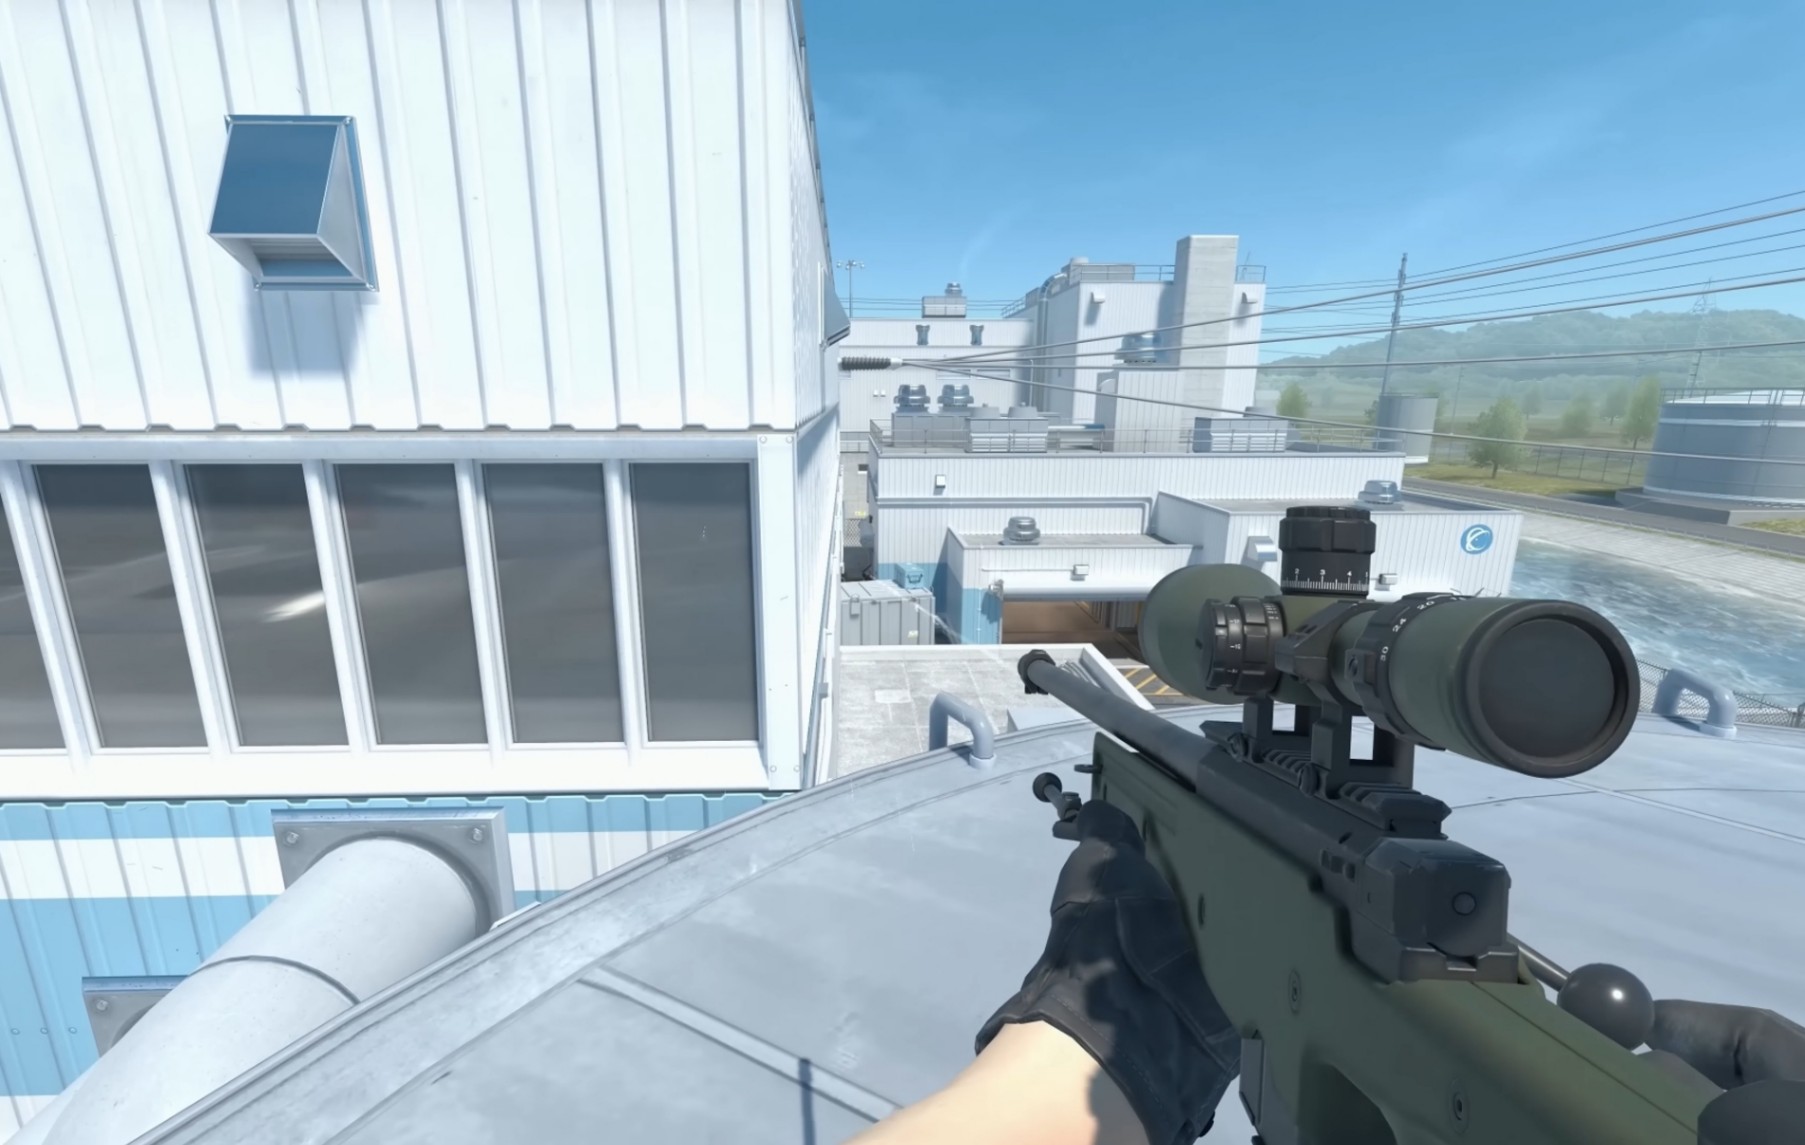 Counter-Strike 2 Mobile Might Be In The Works, Along With New Weapons –